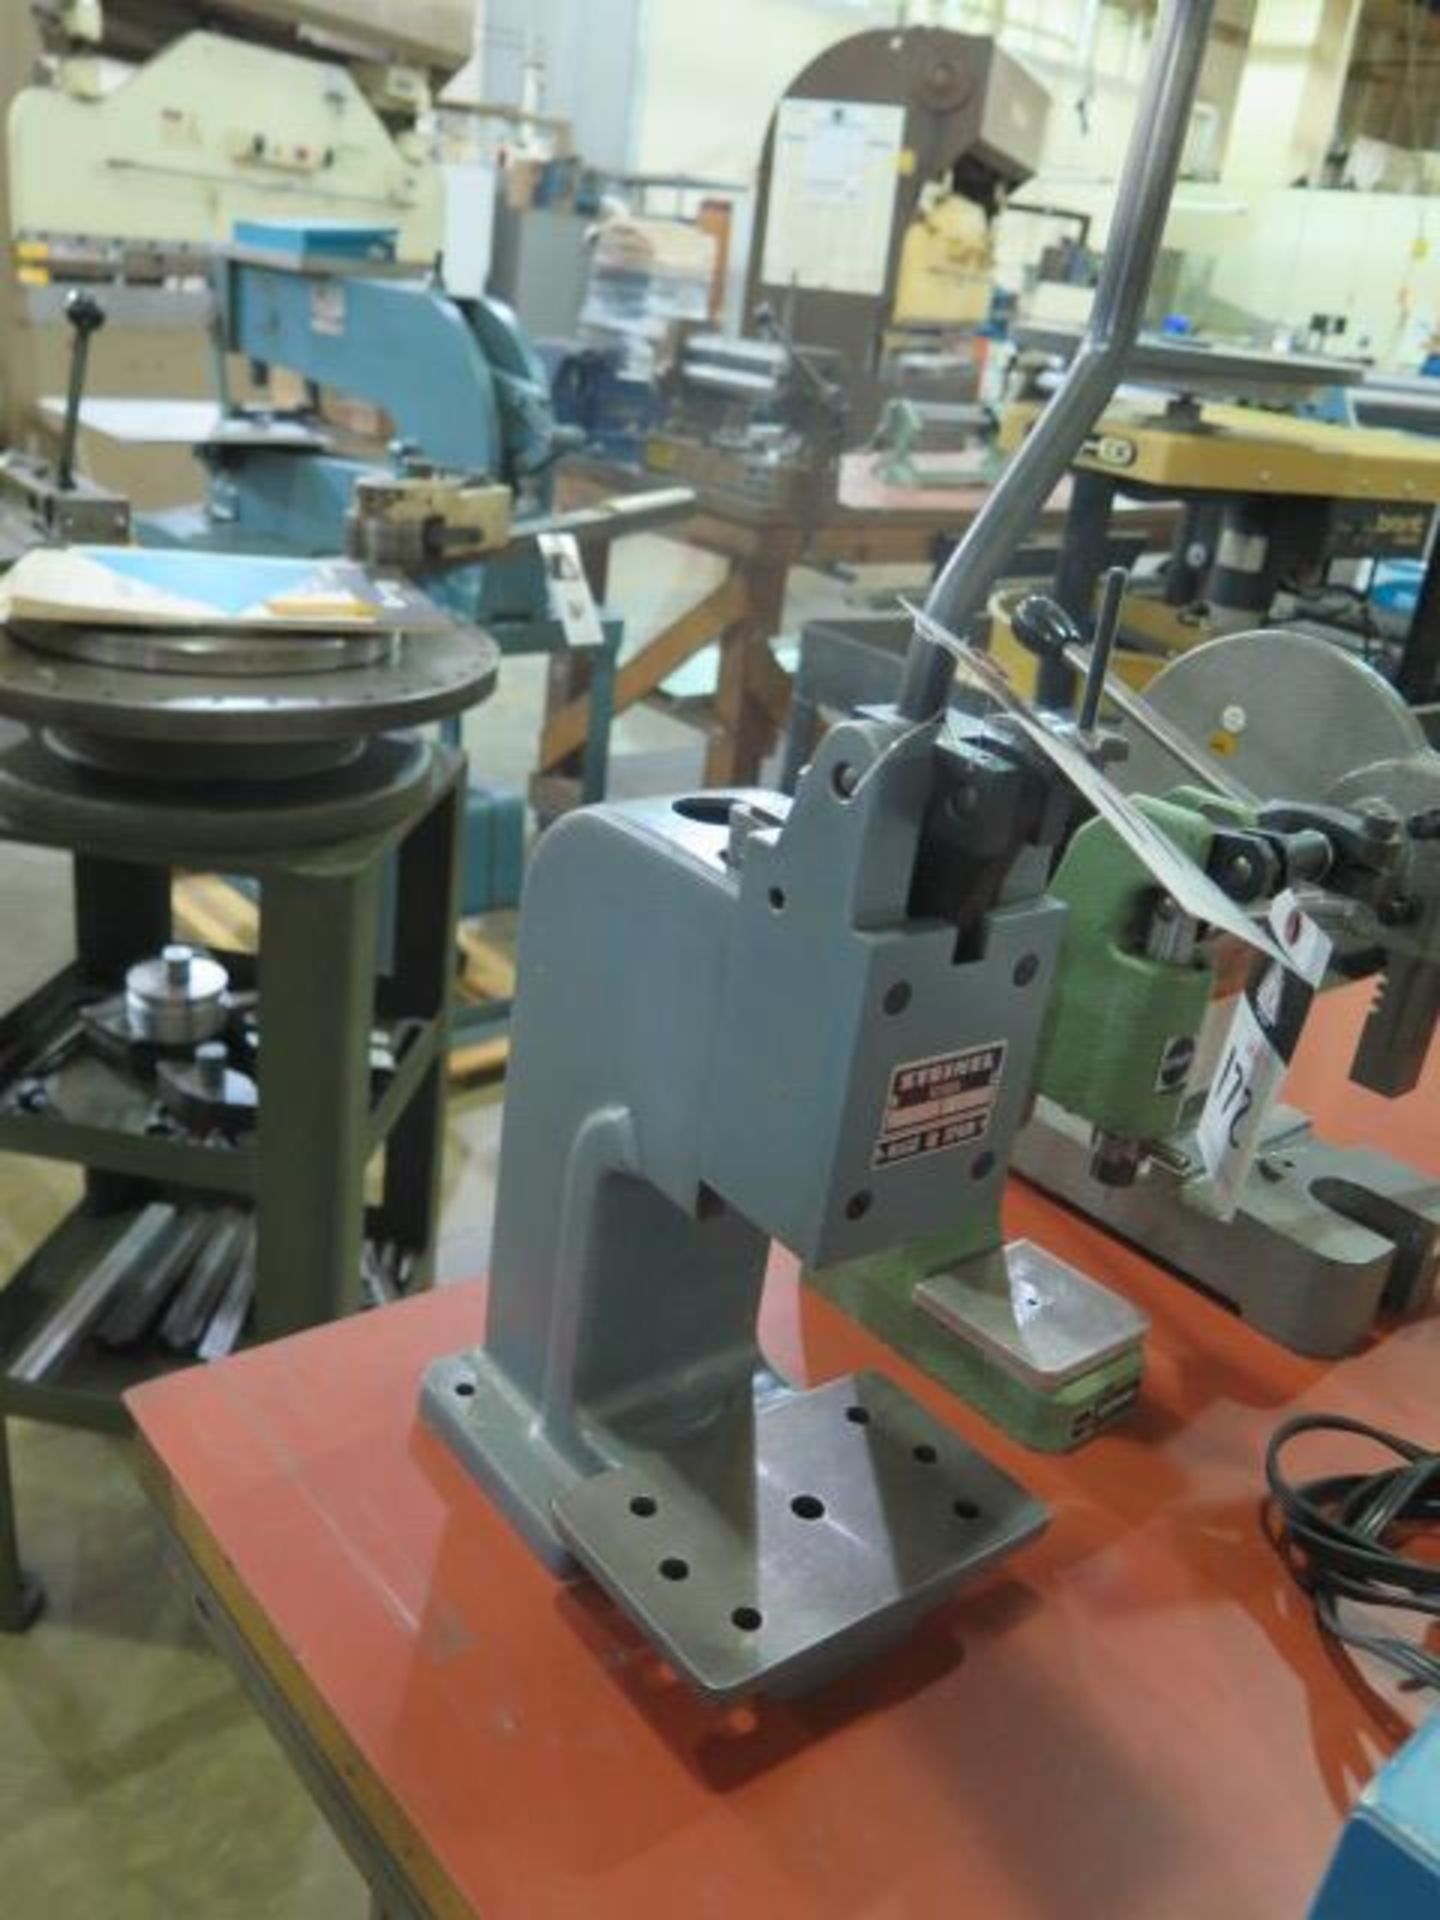 Steinel mdl. PM 1/2" Arbor Press (SOLD AS-IS - NO WARRANTY) - Image 2 of 6